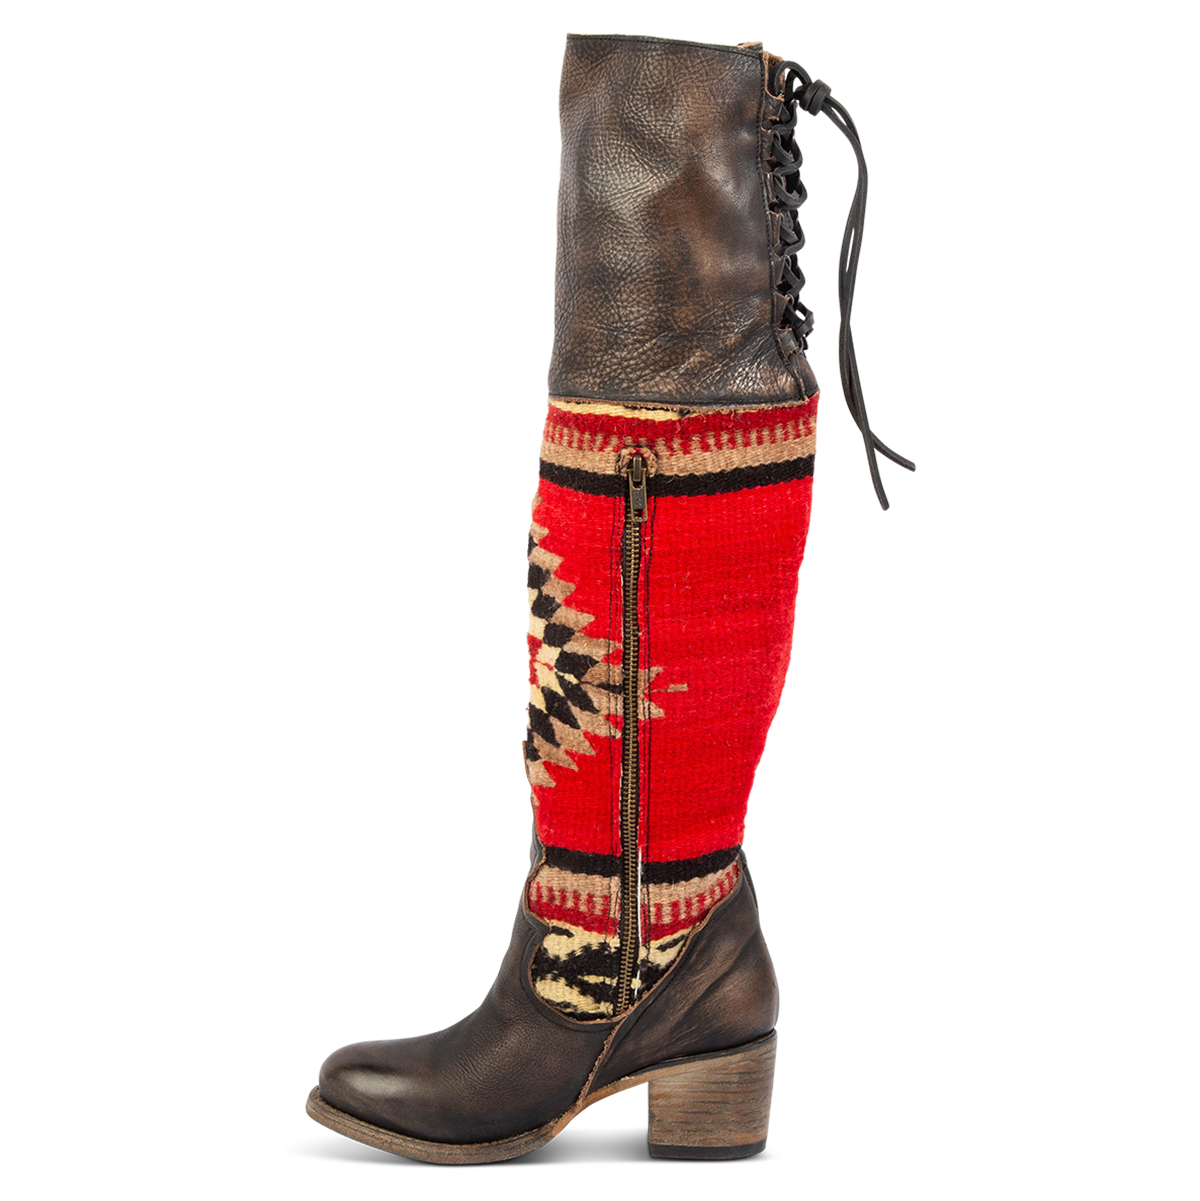 Inside view showing an inside working brass zipper, adjustable leather lacing, and multi-colored woven detailing on FREEBIRD women's Serape black leather knee high boot